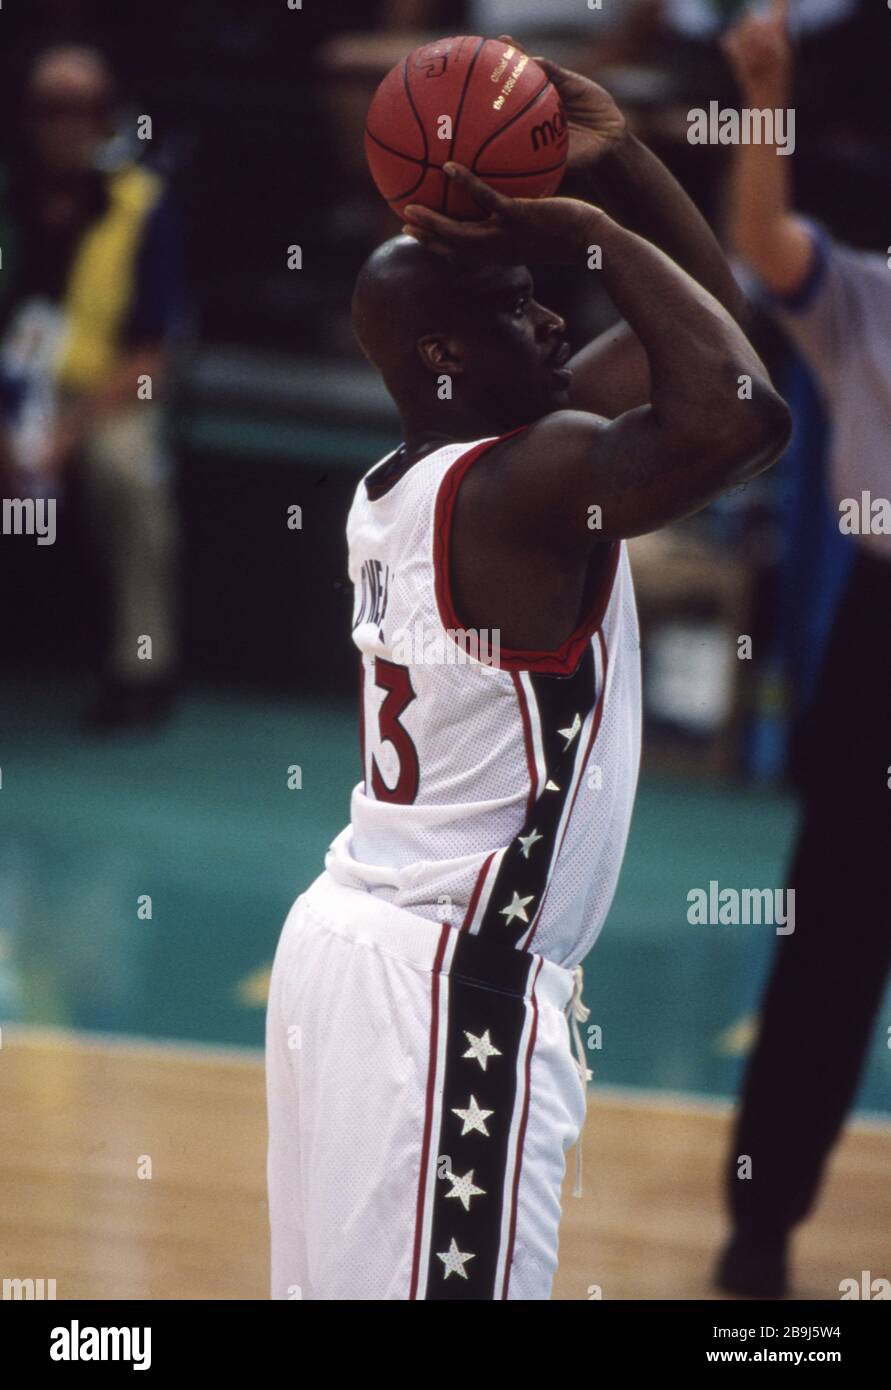 firo: Jul 22, 1996 Sports, basketball, men, men's Olympics, Summer Olympics Olympics, Atlanta, 96, 1996, old pictures, USA wins the gold medal USA - Argentina 96:68 Shaquille O'Neal, half figure, rapper, Hall Of Fame, 14x All-NBA team | usage worldwide Stock Photo